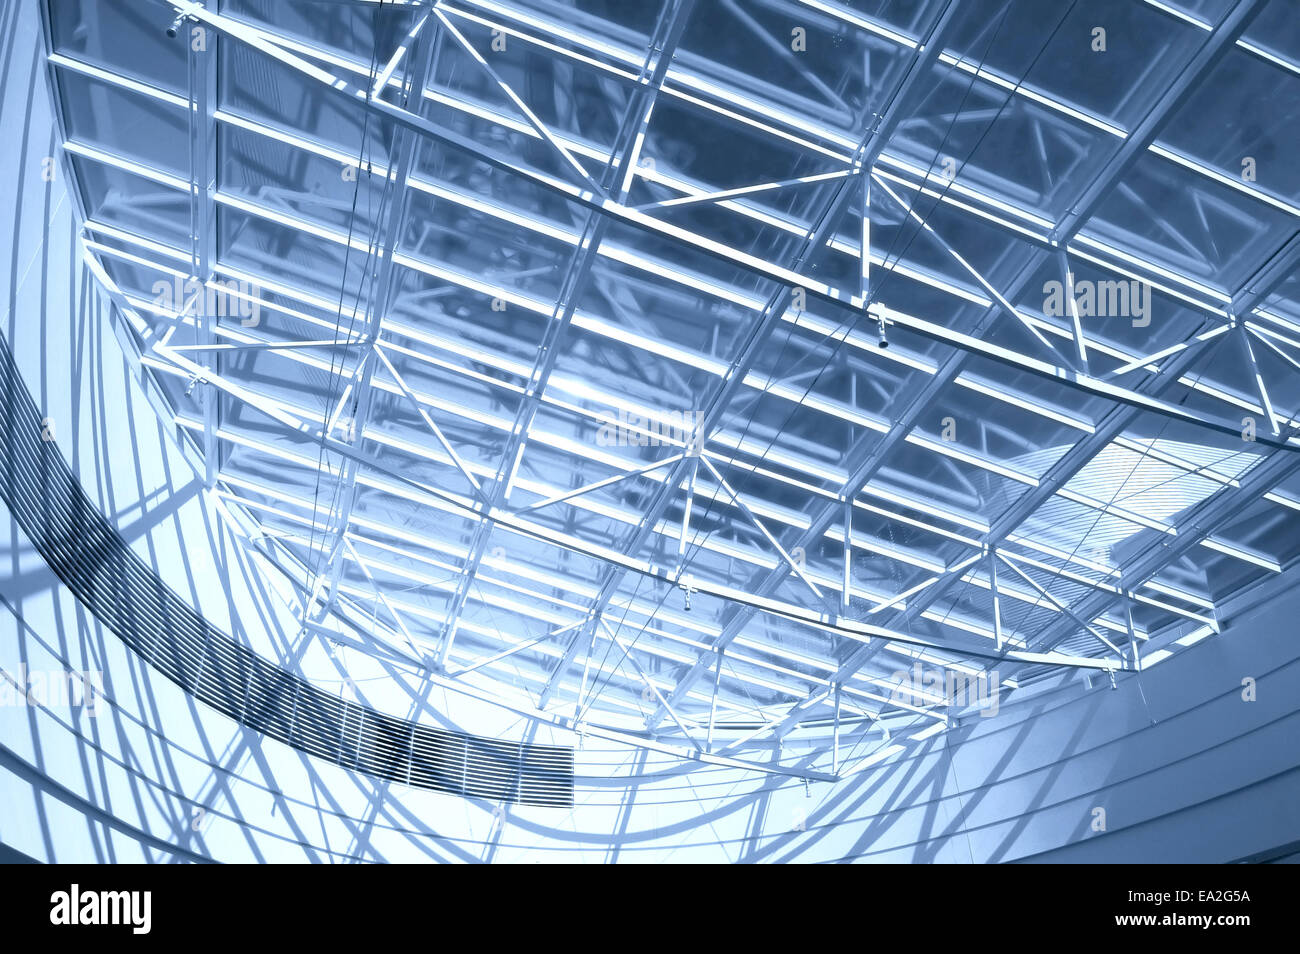 Architecture conceptual image. Modern roof construction in blue colors. Stock Photo